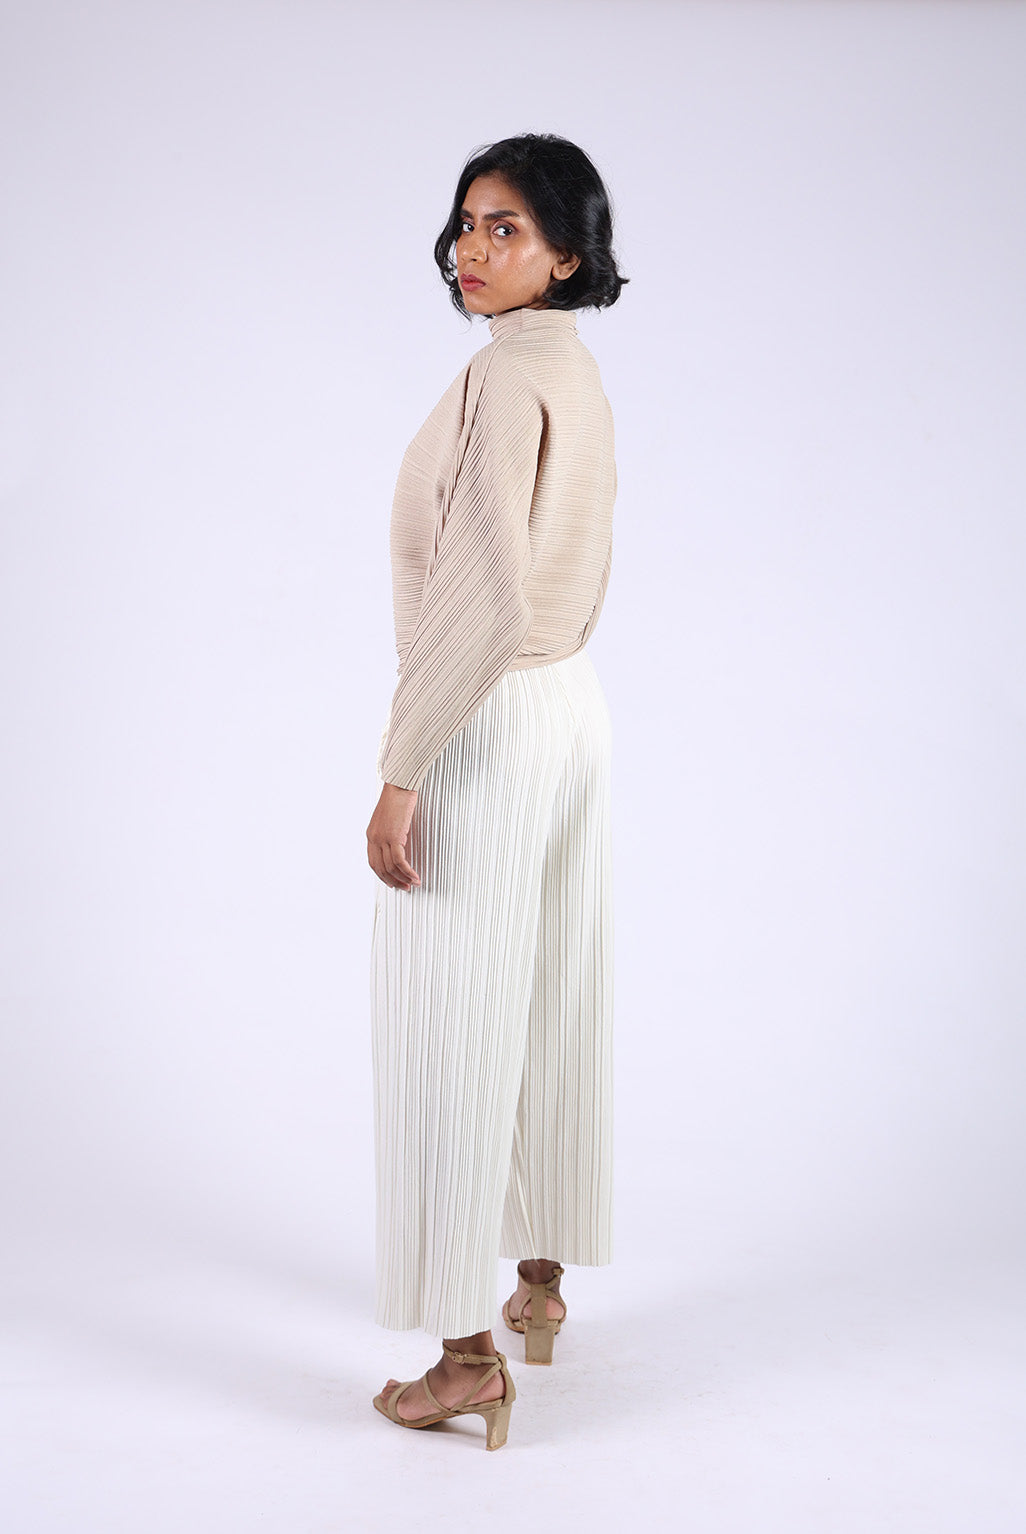 Beige Pleated Top with white Pleated Pants